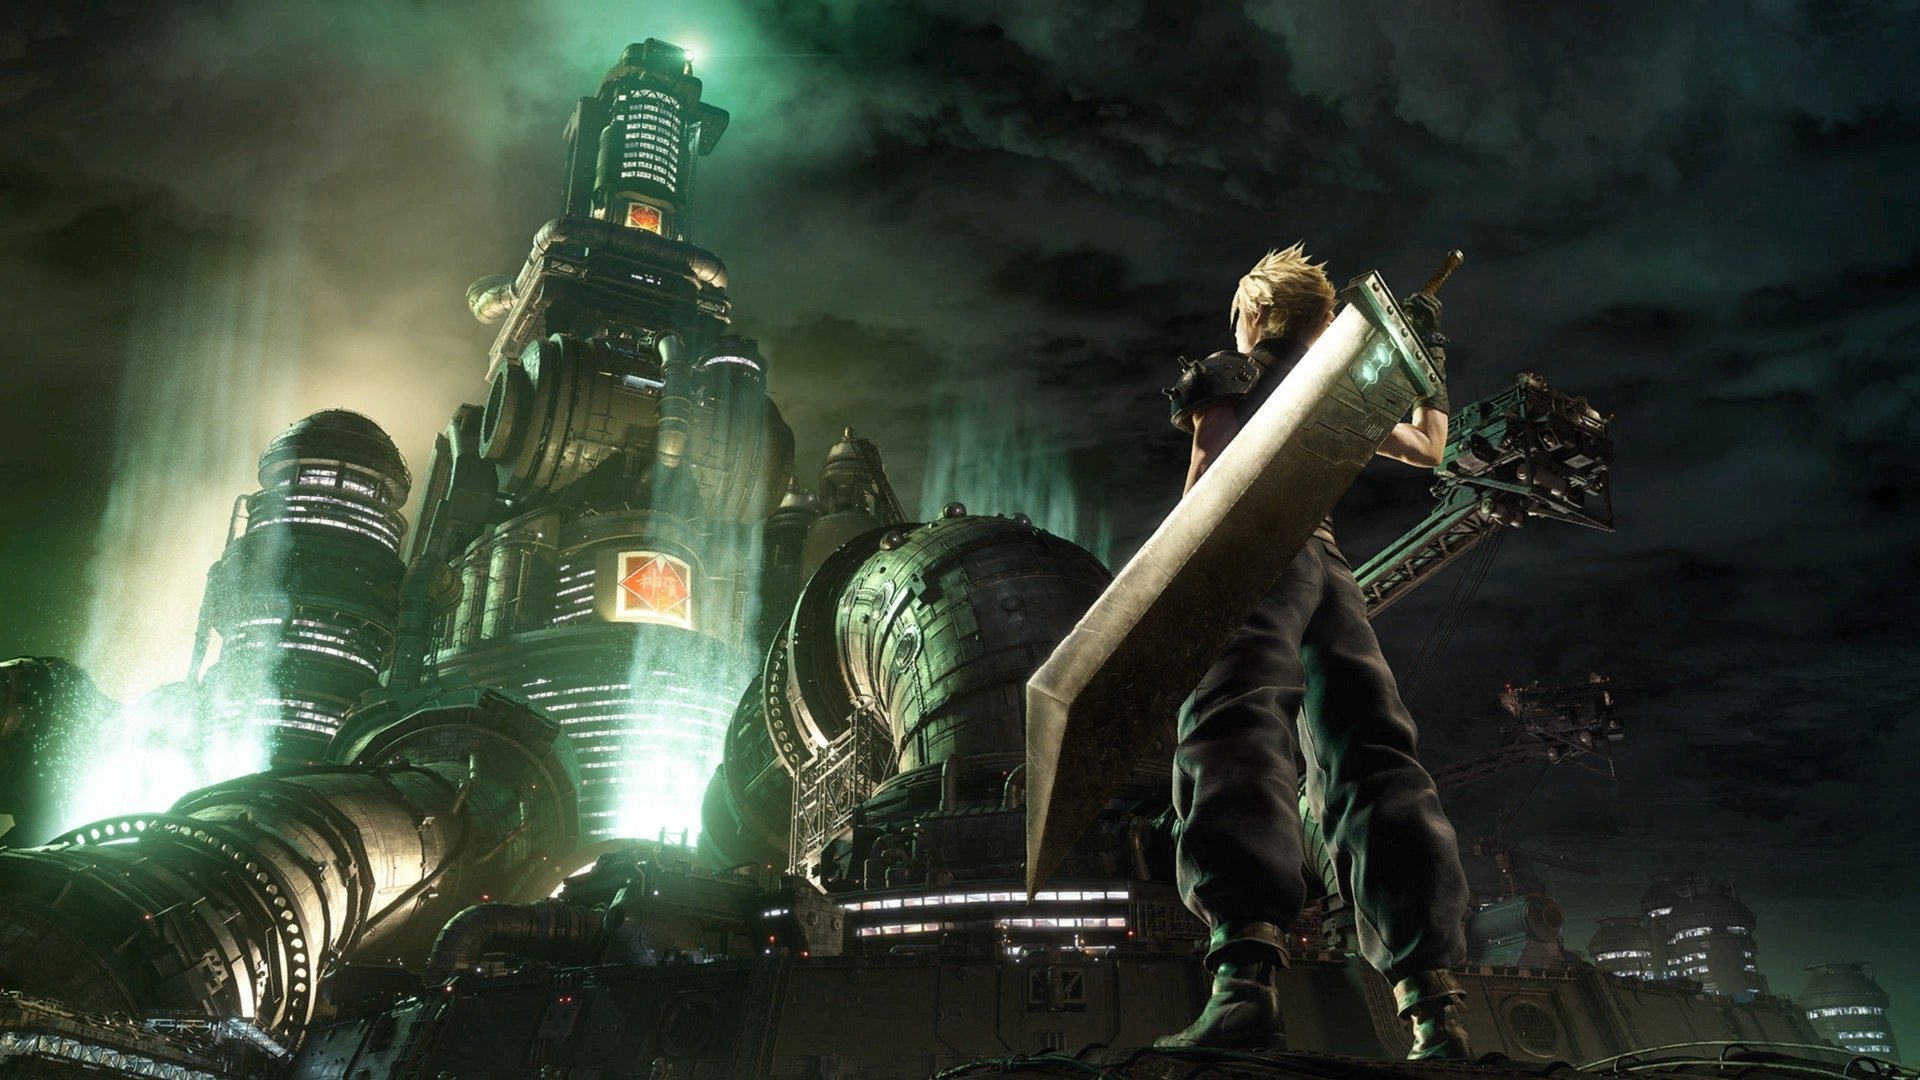 Final Fantasy 7 Remake for PS4 review: Back again to define